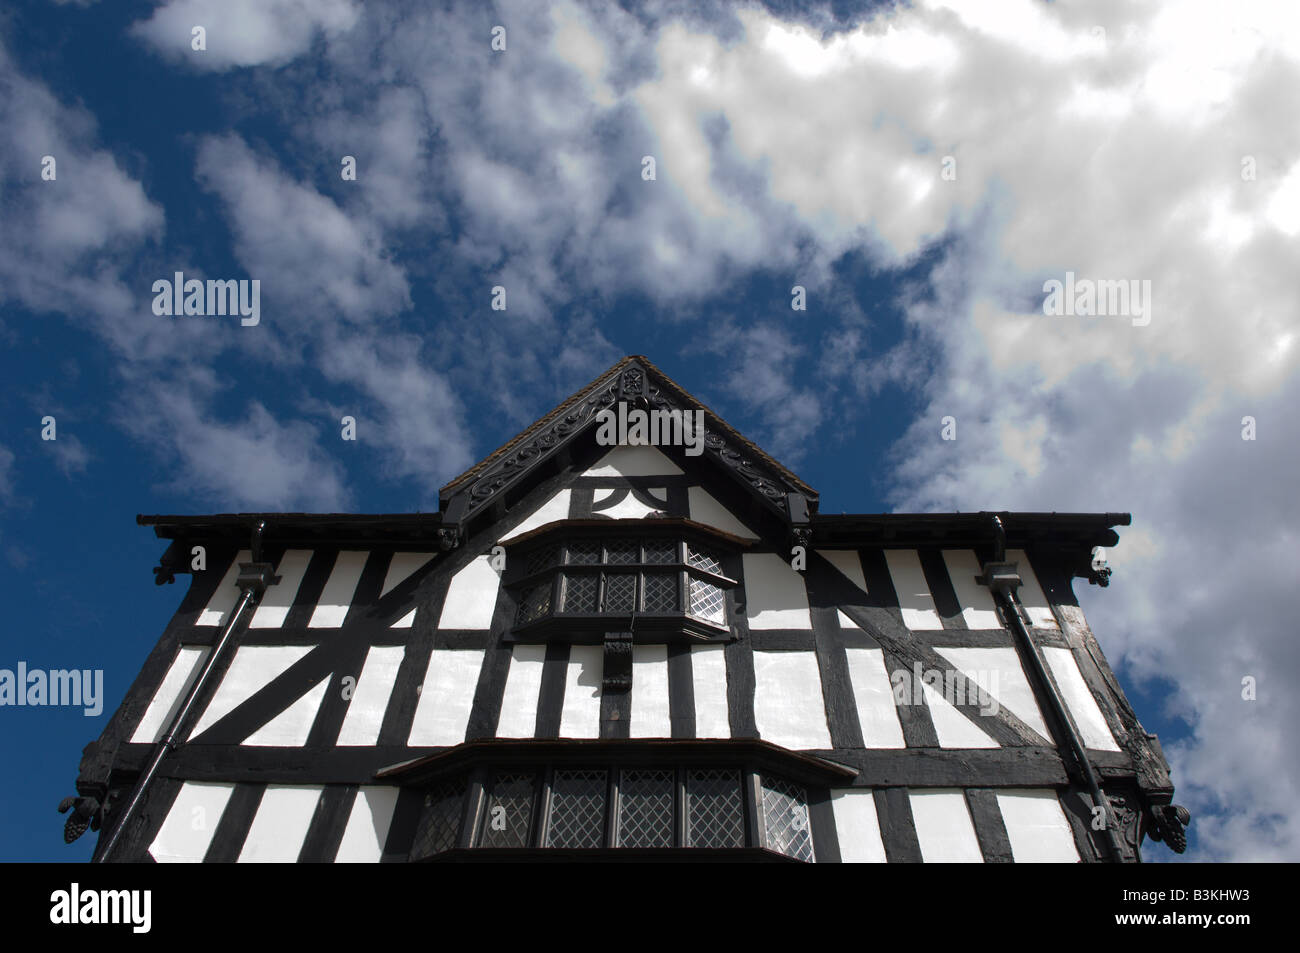 The Black and White House Hereford City Herefordshire England Great Britain Stock Photo